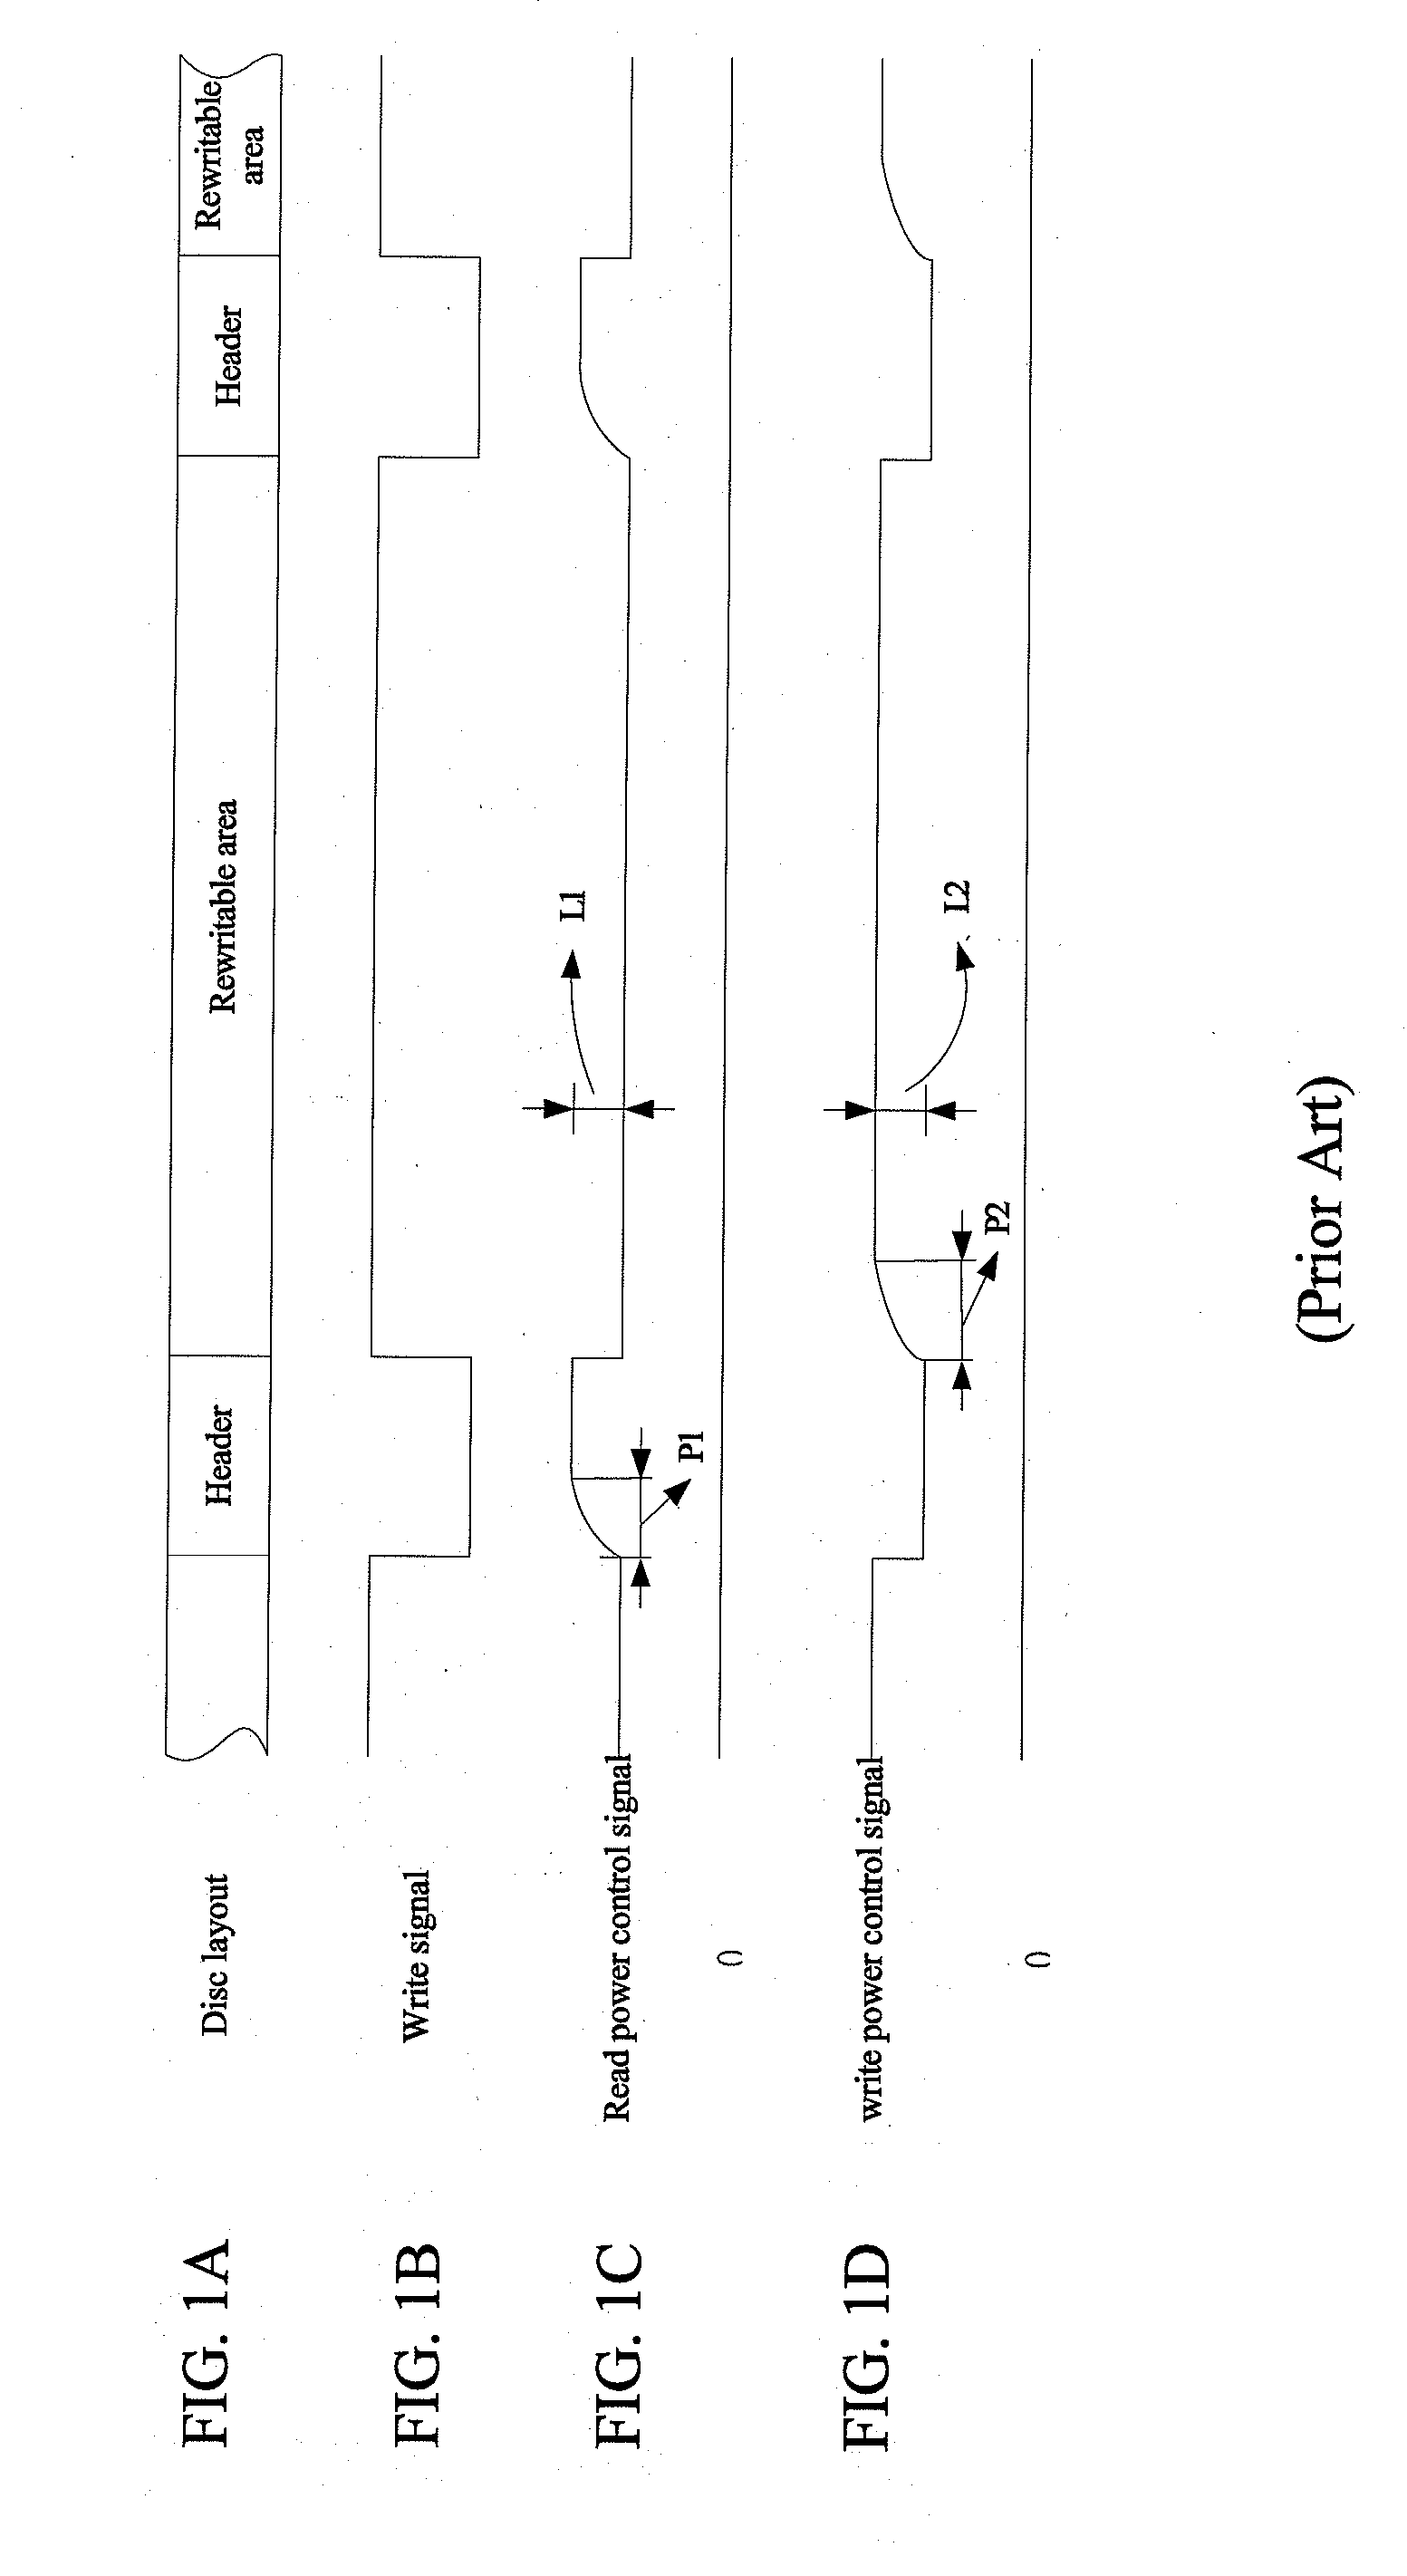 Read and write power control methods and system for optical recording device